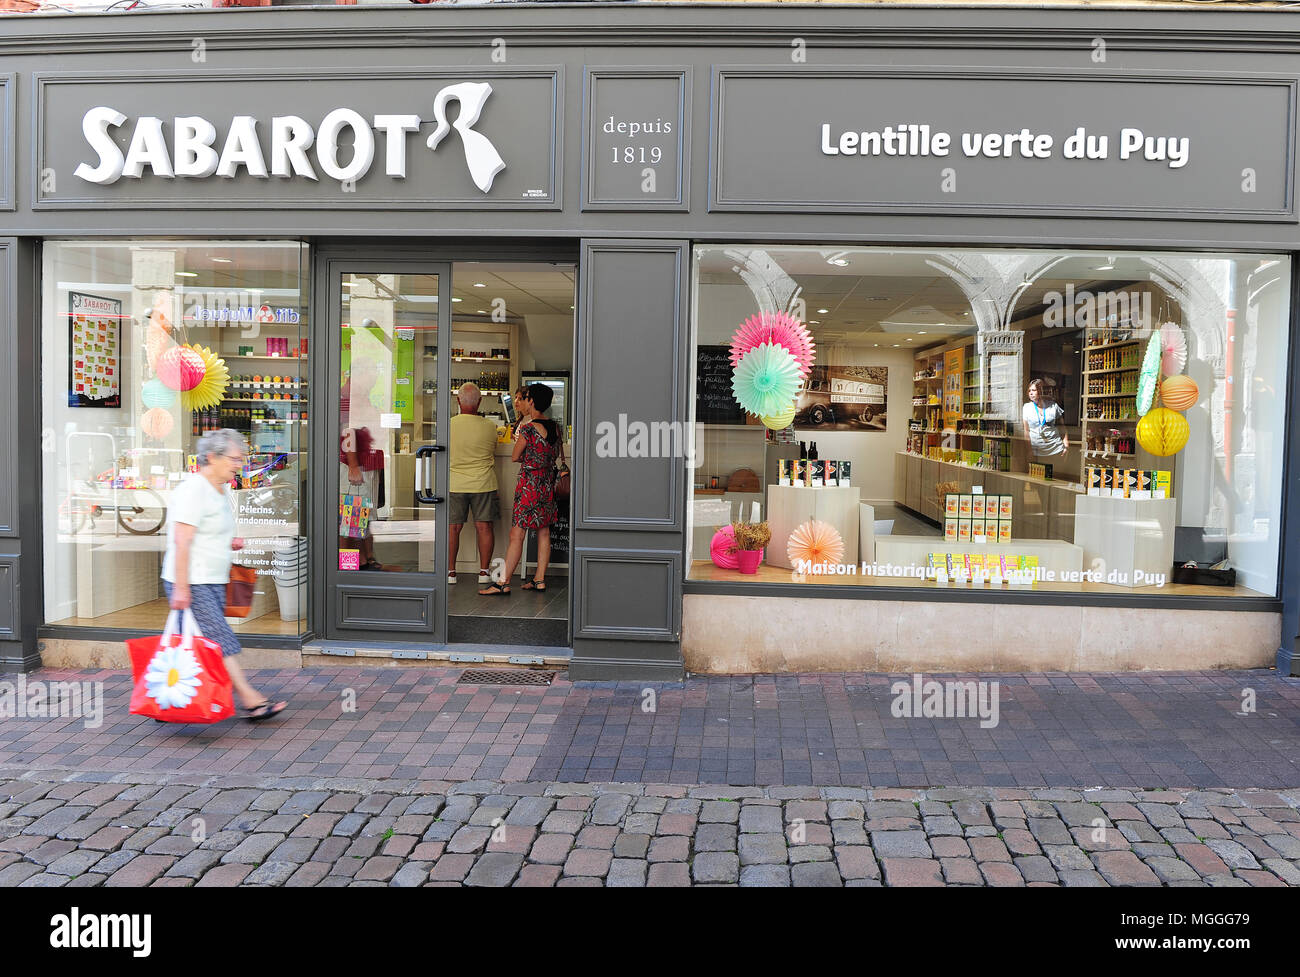 A woman walks by the entrance of Sabarot gourmet food shop in Le-Puy-en-Velais, France Stock Photo